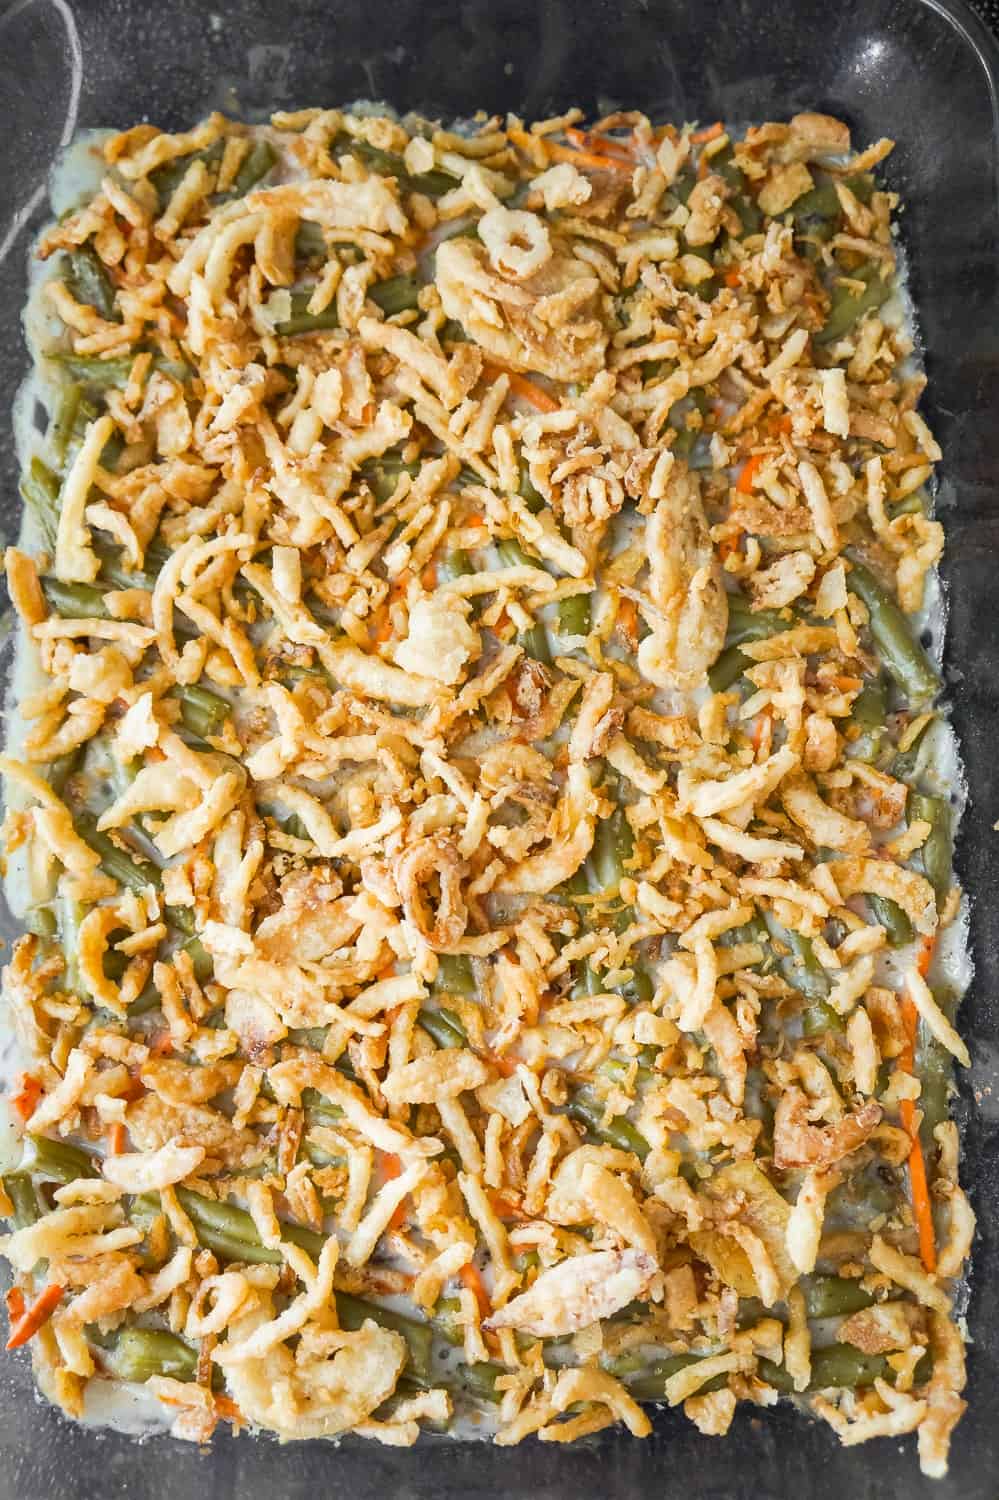 French's fried onions on top of green bean casserole